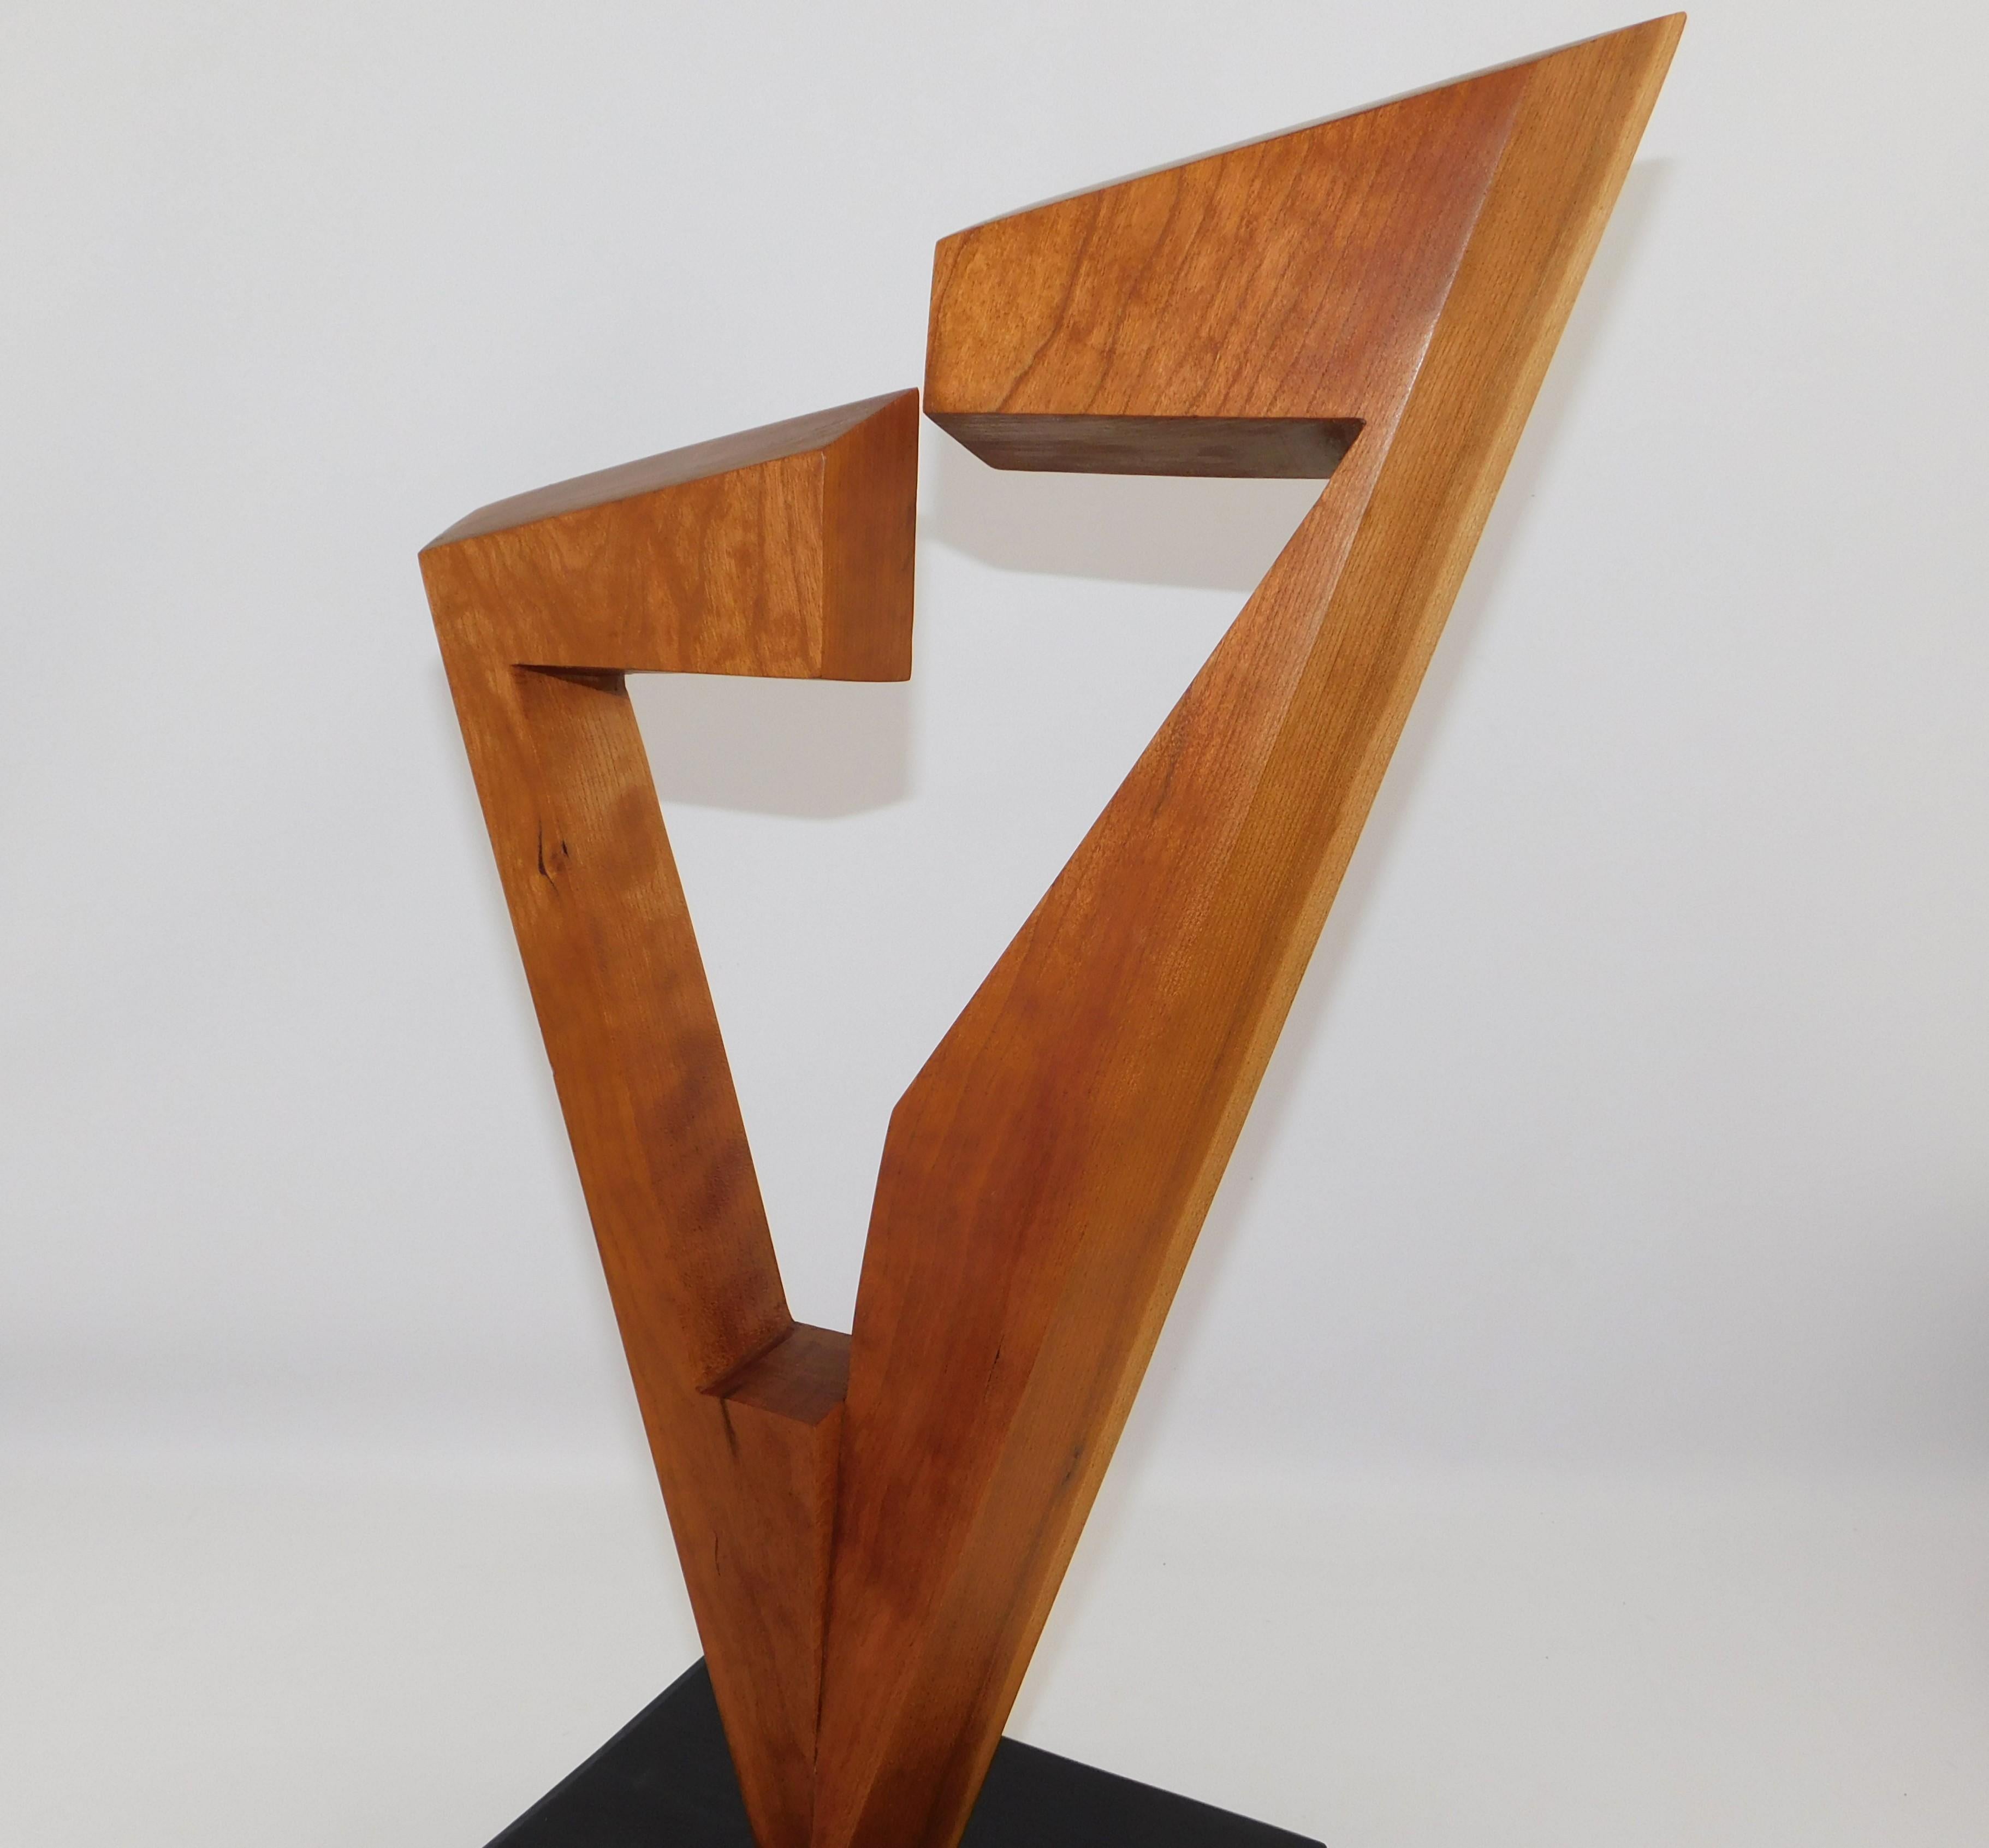 Hand-Crafted Signed Modern Abstract Constructivist Styled Cherry Wood Sculpture on Base